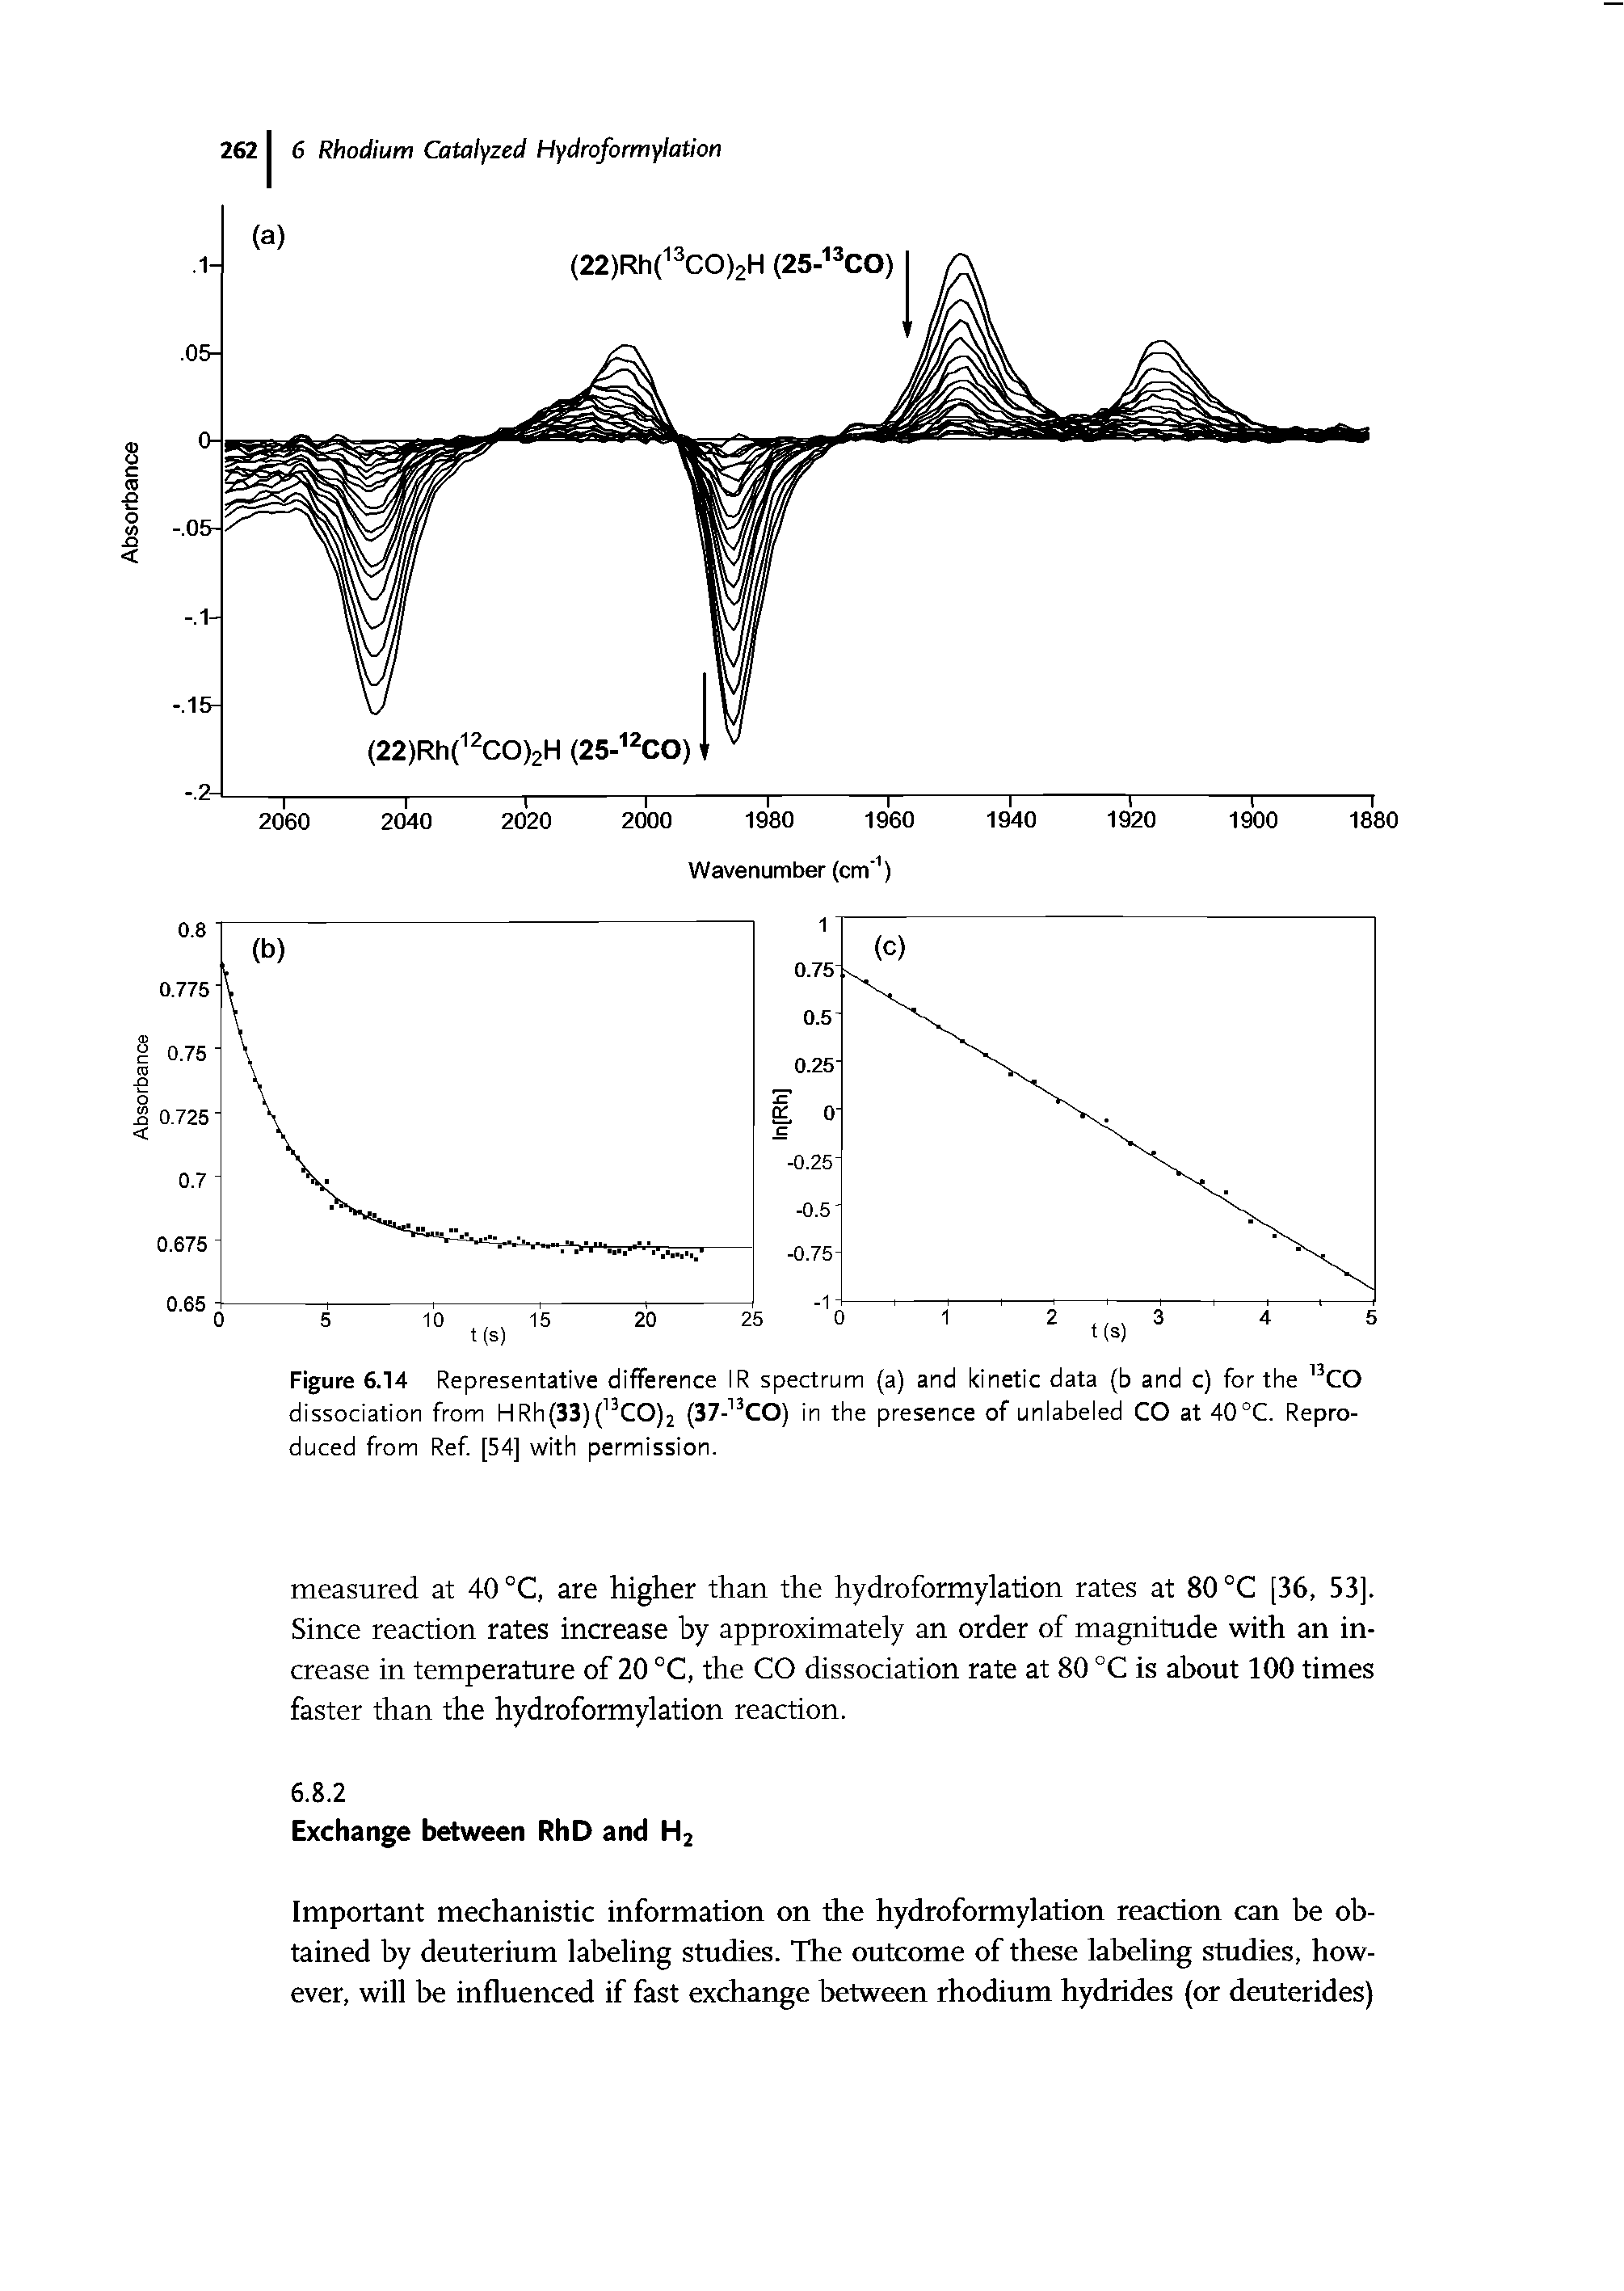 Figure 6.14 Representative difference IR spectrum (a) and kinetic data (b and c) for the CO dissociation from HRh(33)( CO)2 (37- CO) in the presence of unlabeled CO at 40°C. Reproduced from Ref [54] with permission.